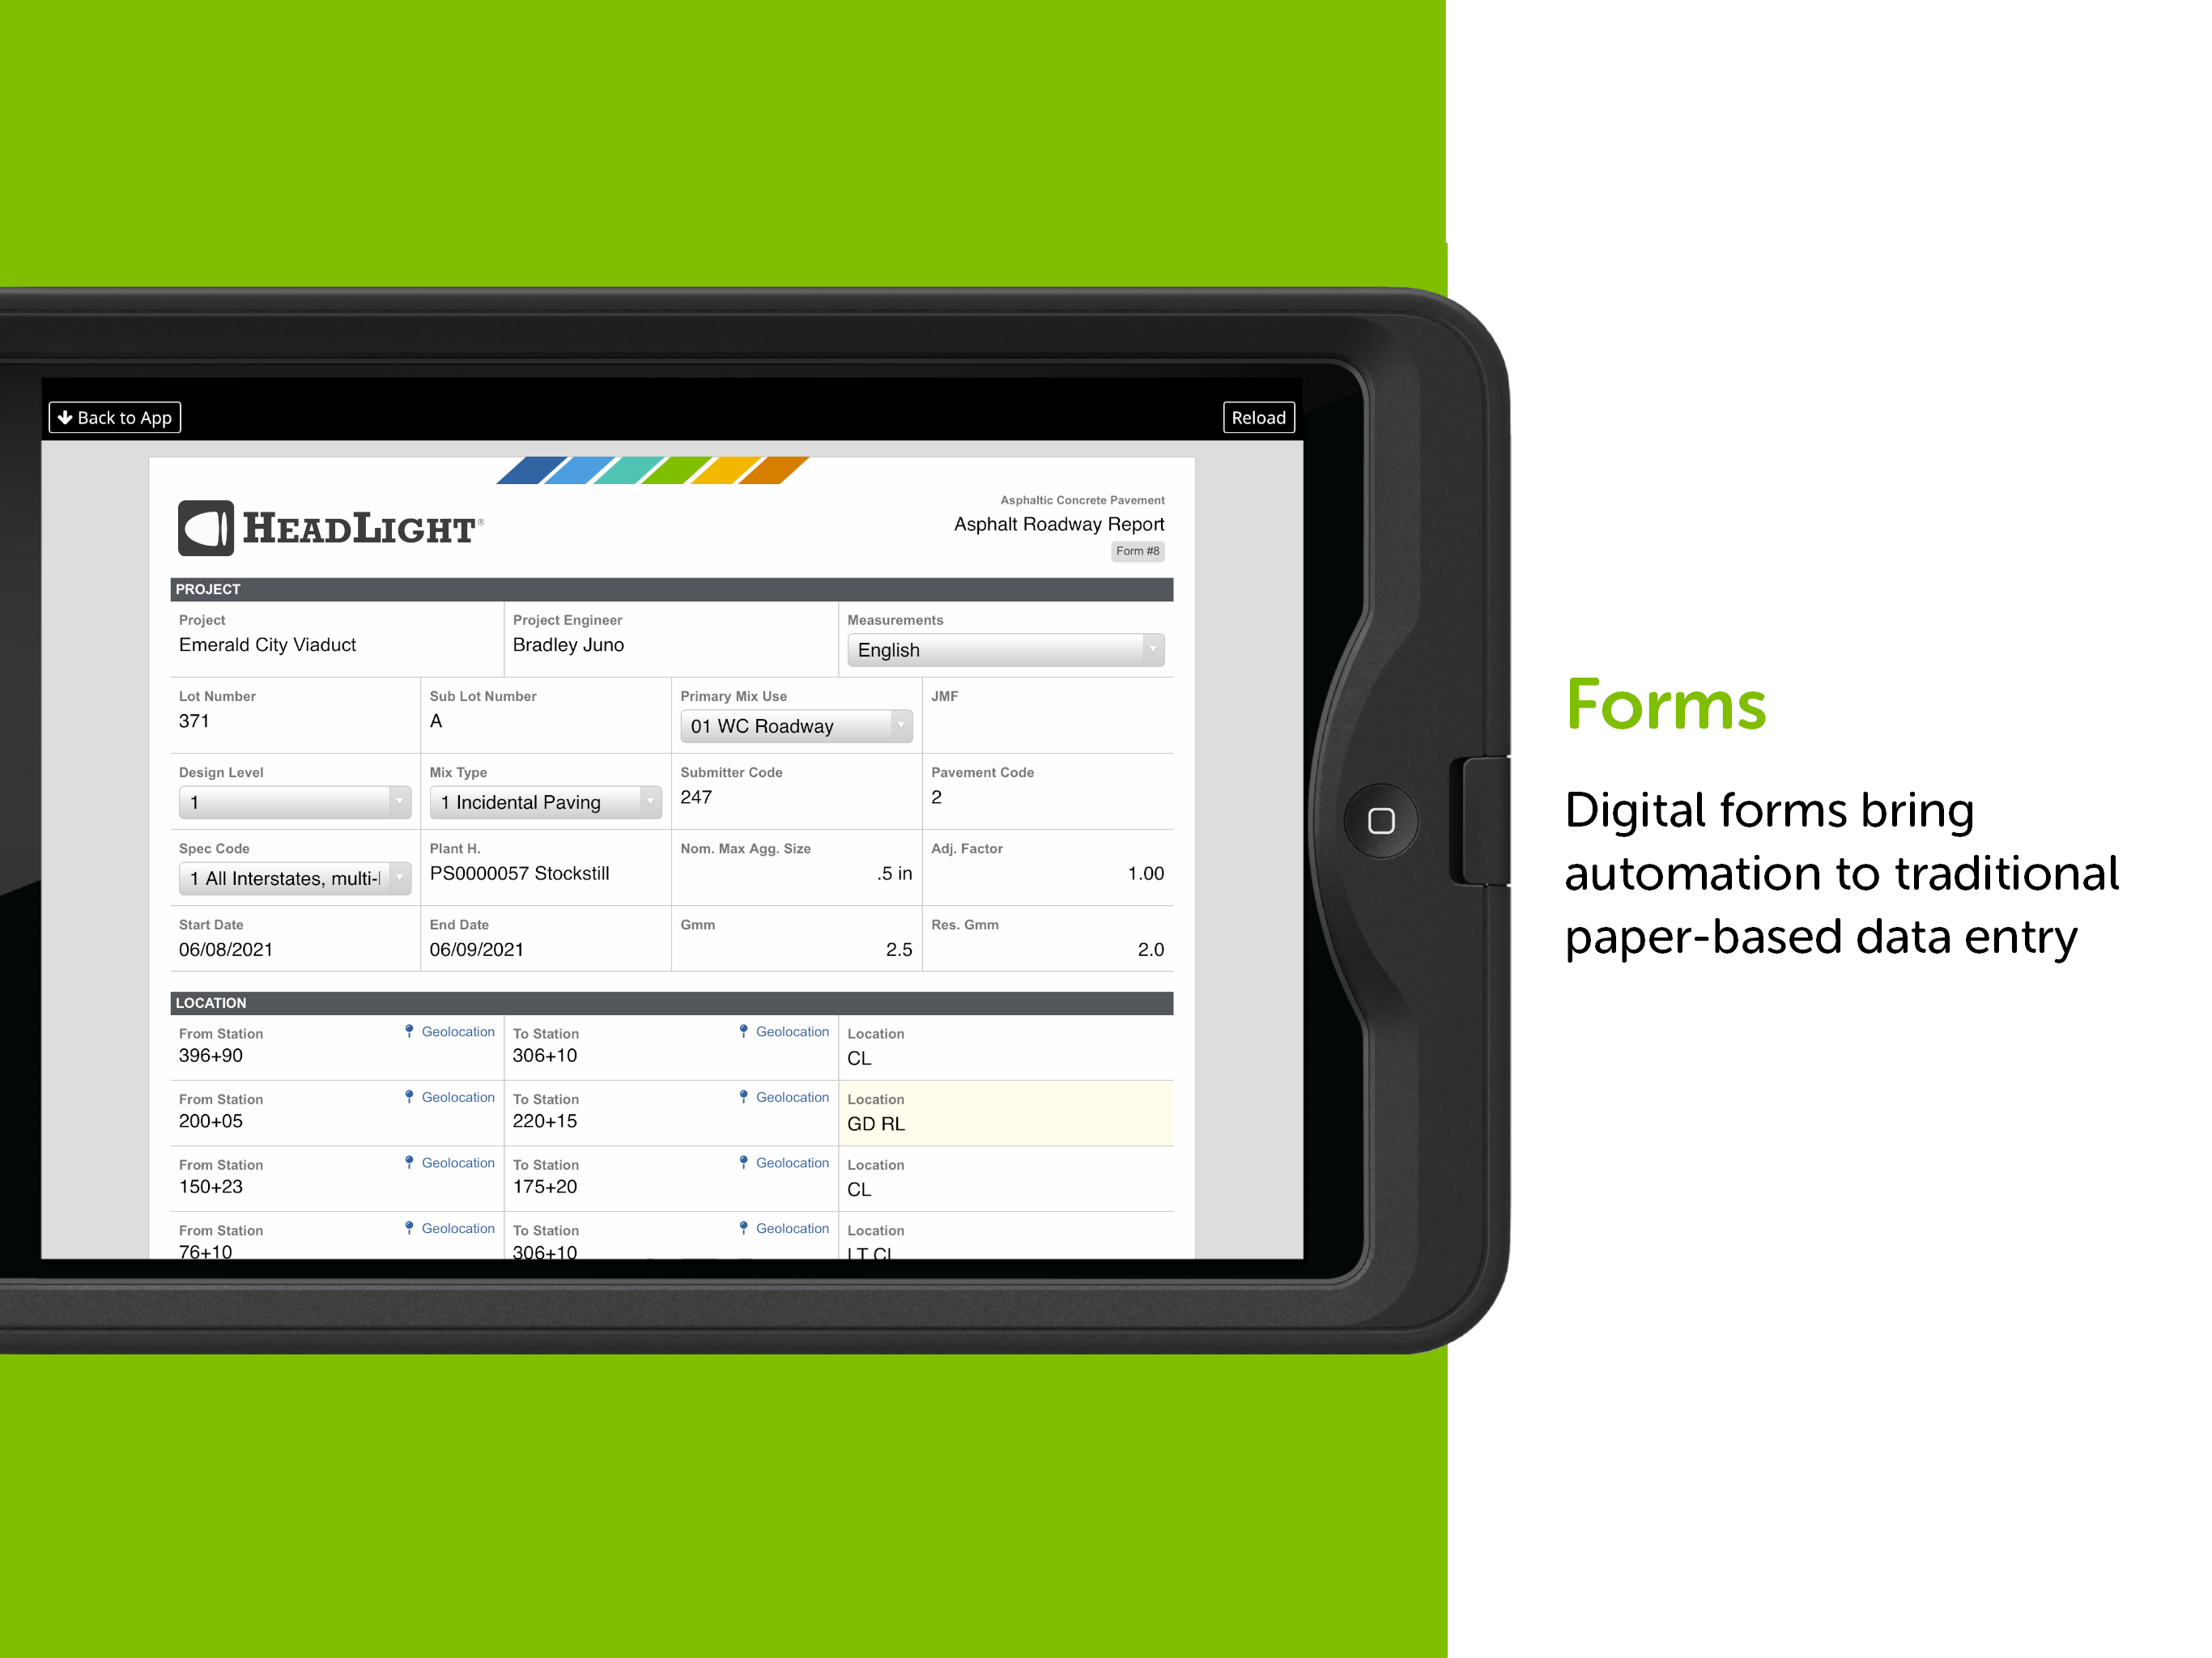 Forms: digital forms bring automation to traditional paper-based data entry.